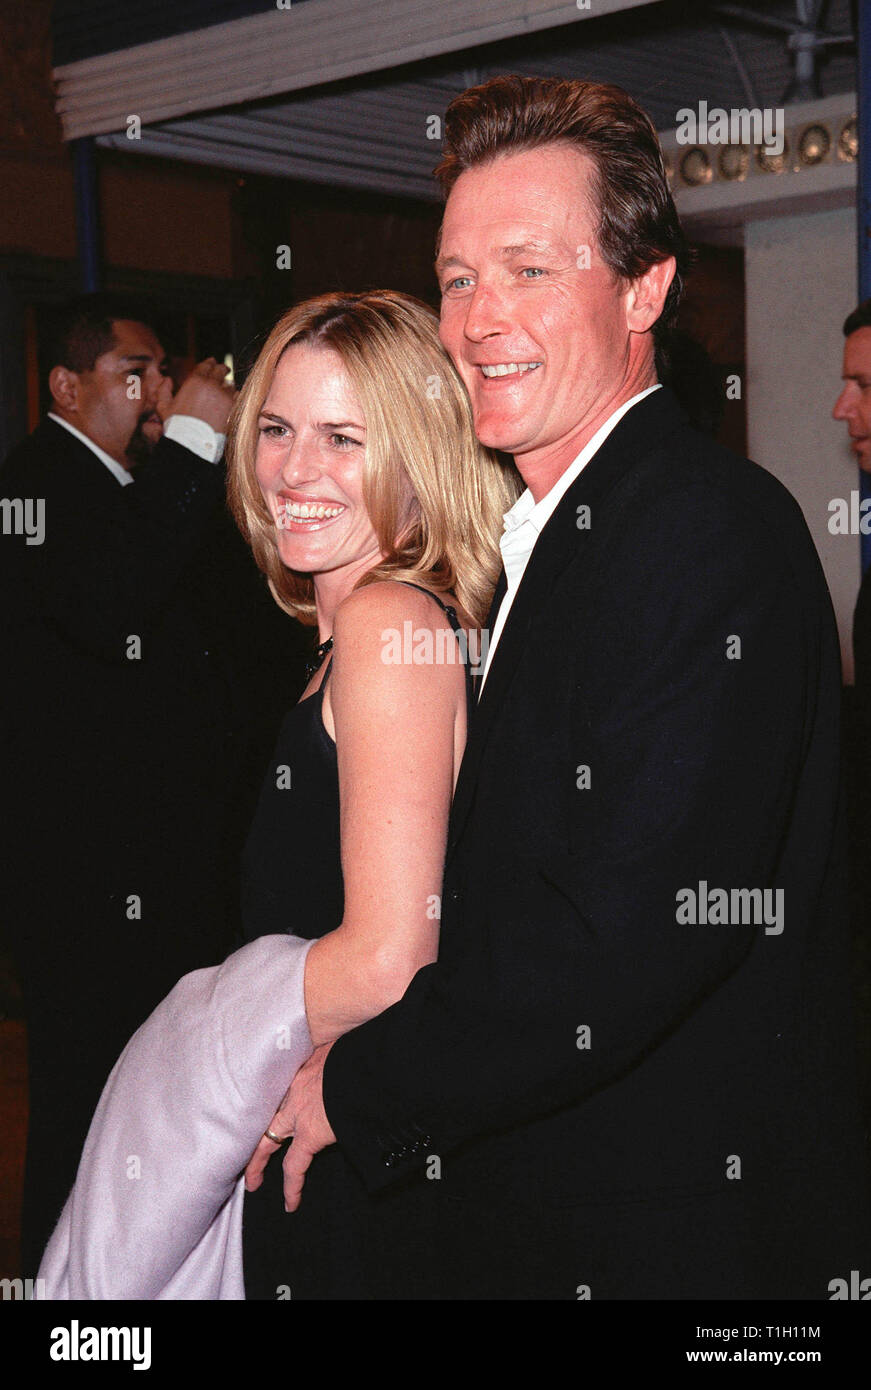 LOS ANGELES, CA. October 06, 1999:   Actor Robert Patrick & wife at the world premiere in Los Angeles of 'Fight Club' which stars Brad Pitt, Edward Norton & Helena Bonham Carter.                          © Paul Smith / Featureflash Stock Photo